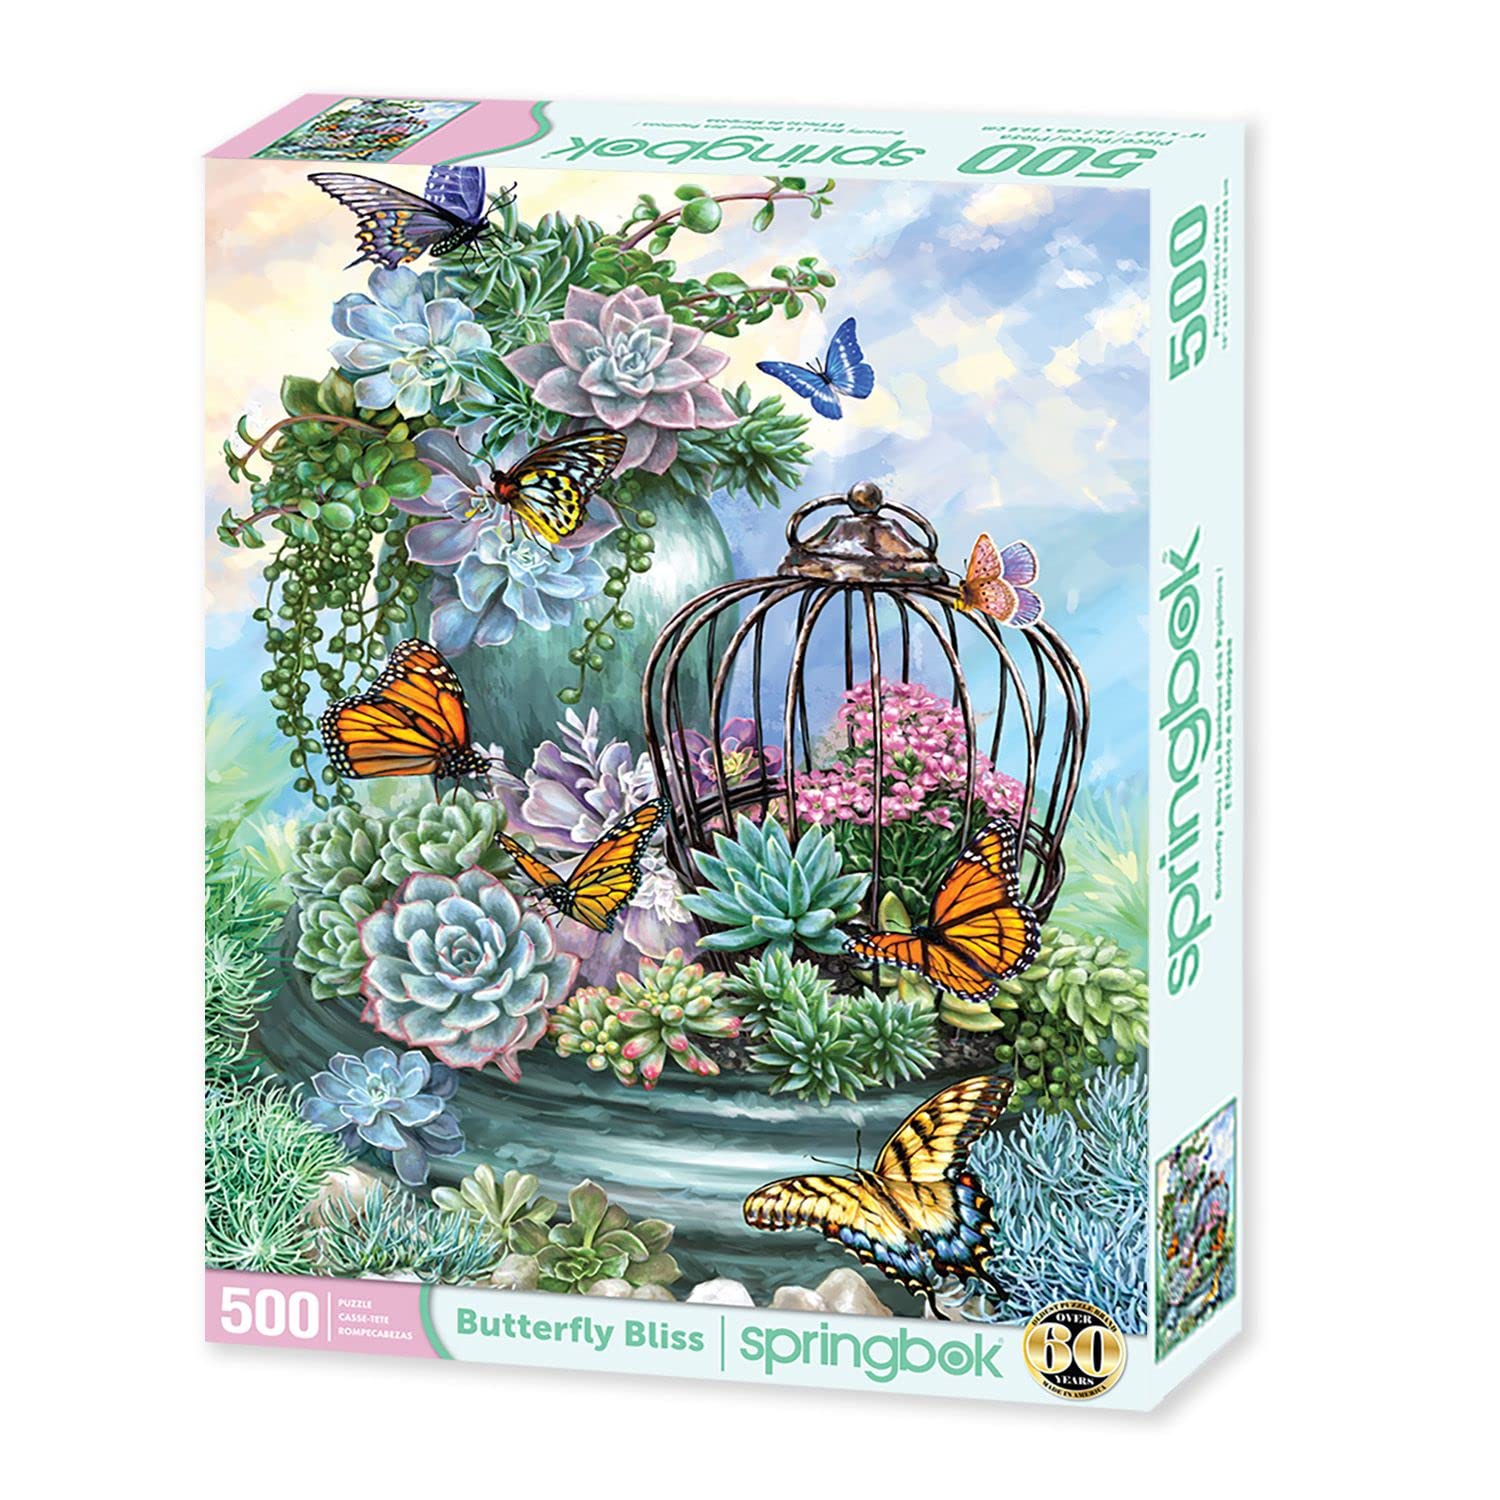 Springbok's 500 Piece Jigsaw Puzzle Butterfly Bliss - Made in USA